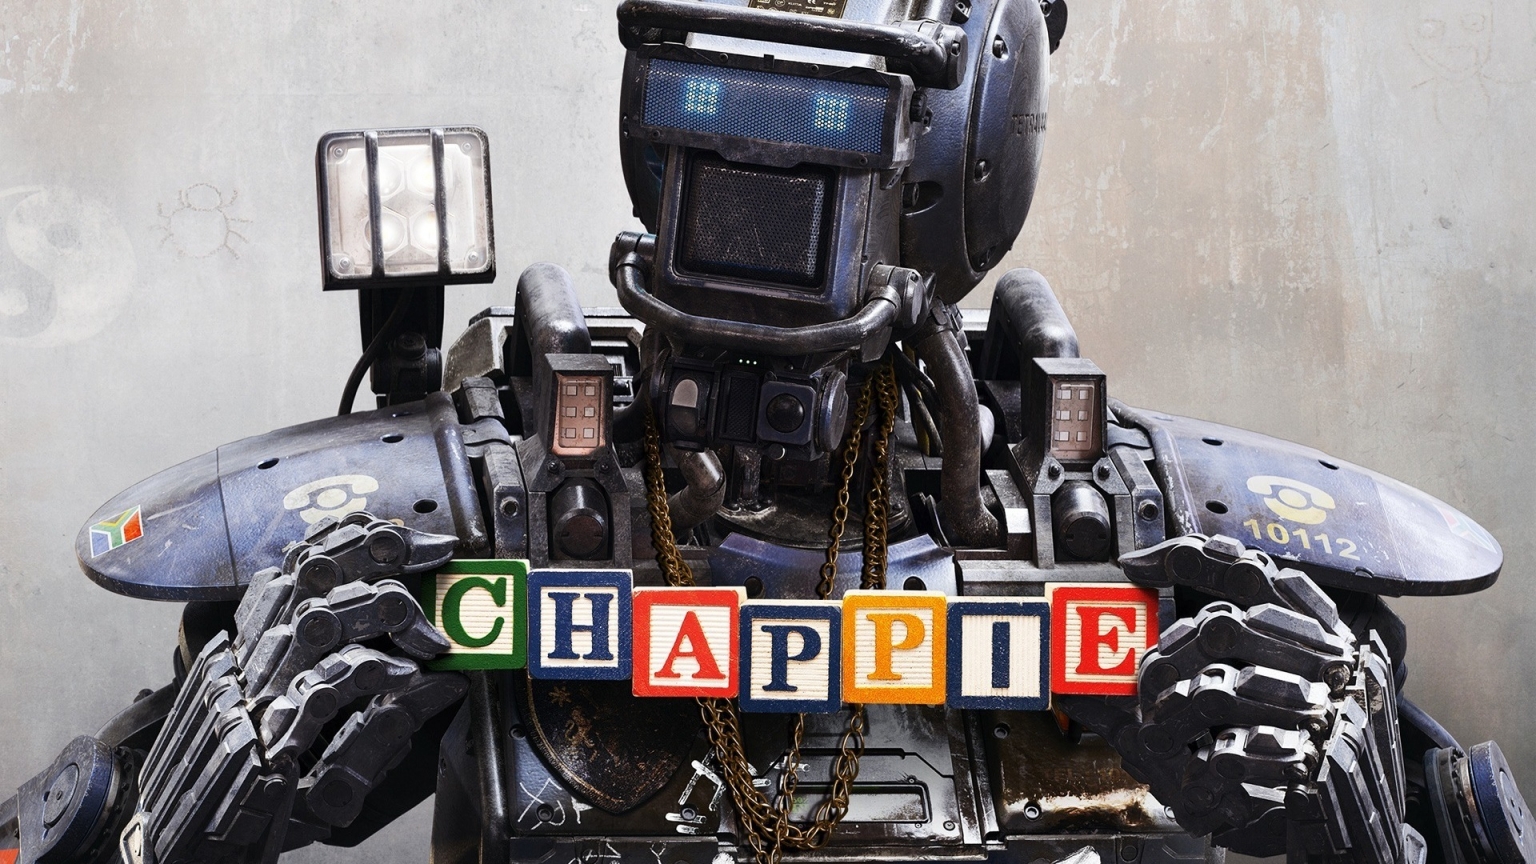 Chappie Robot for 1536 x 864 HDTV resolution